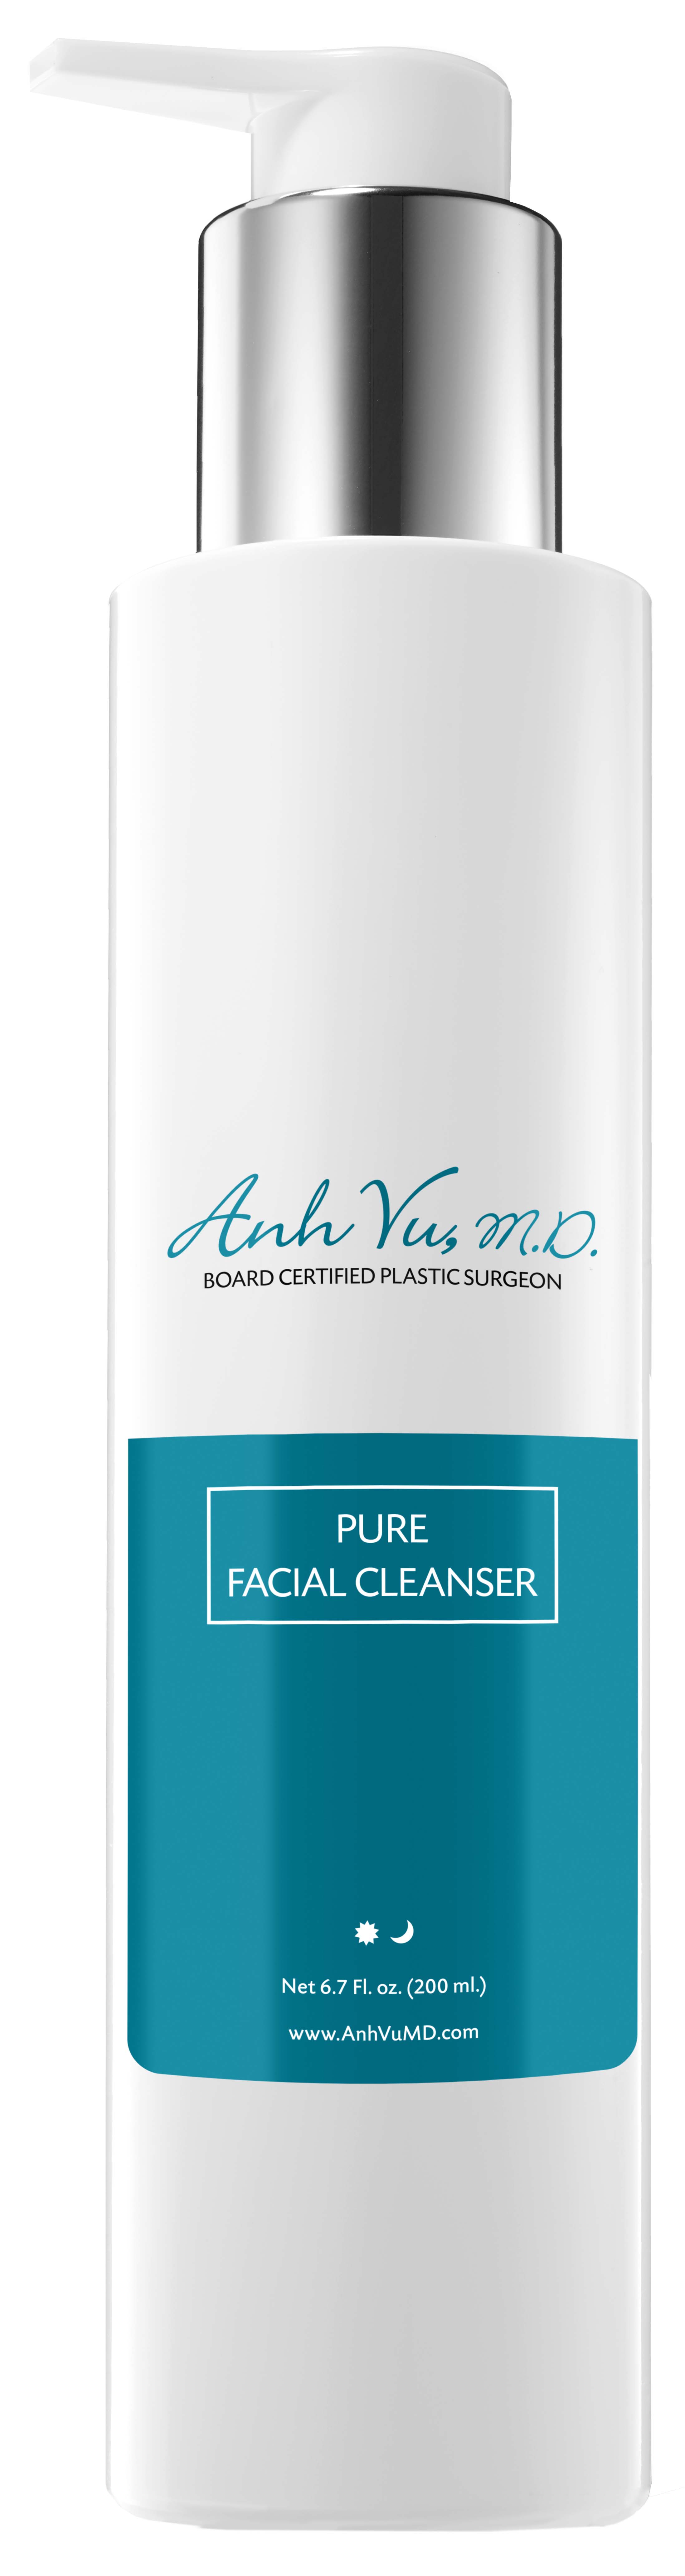 PURE FACIAL CLEANSER